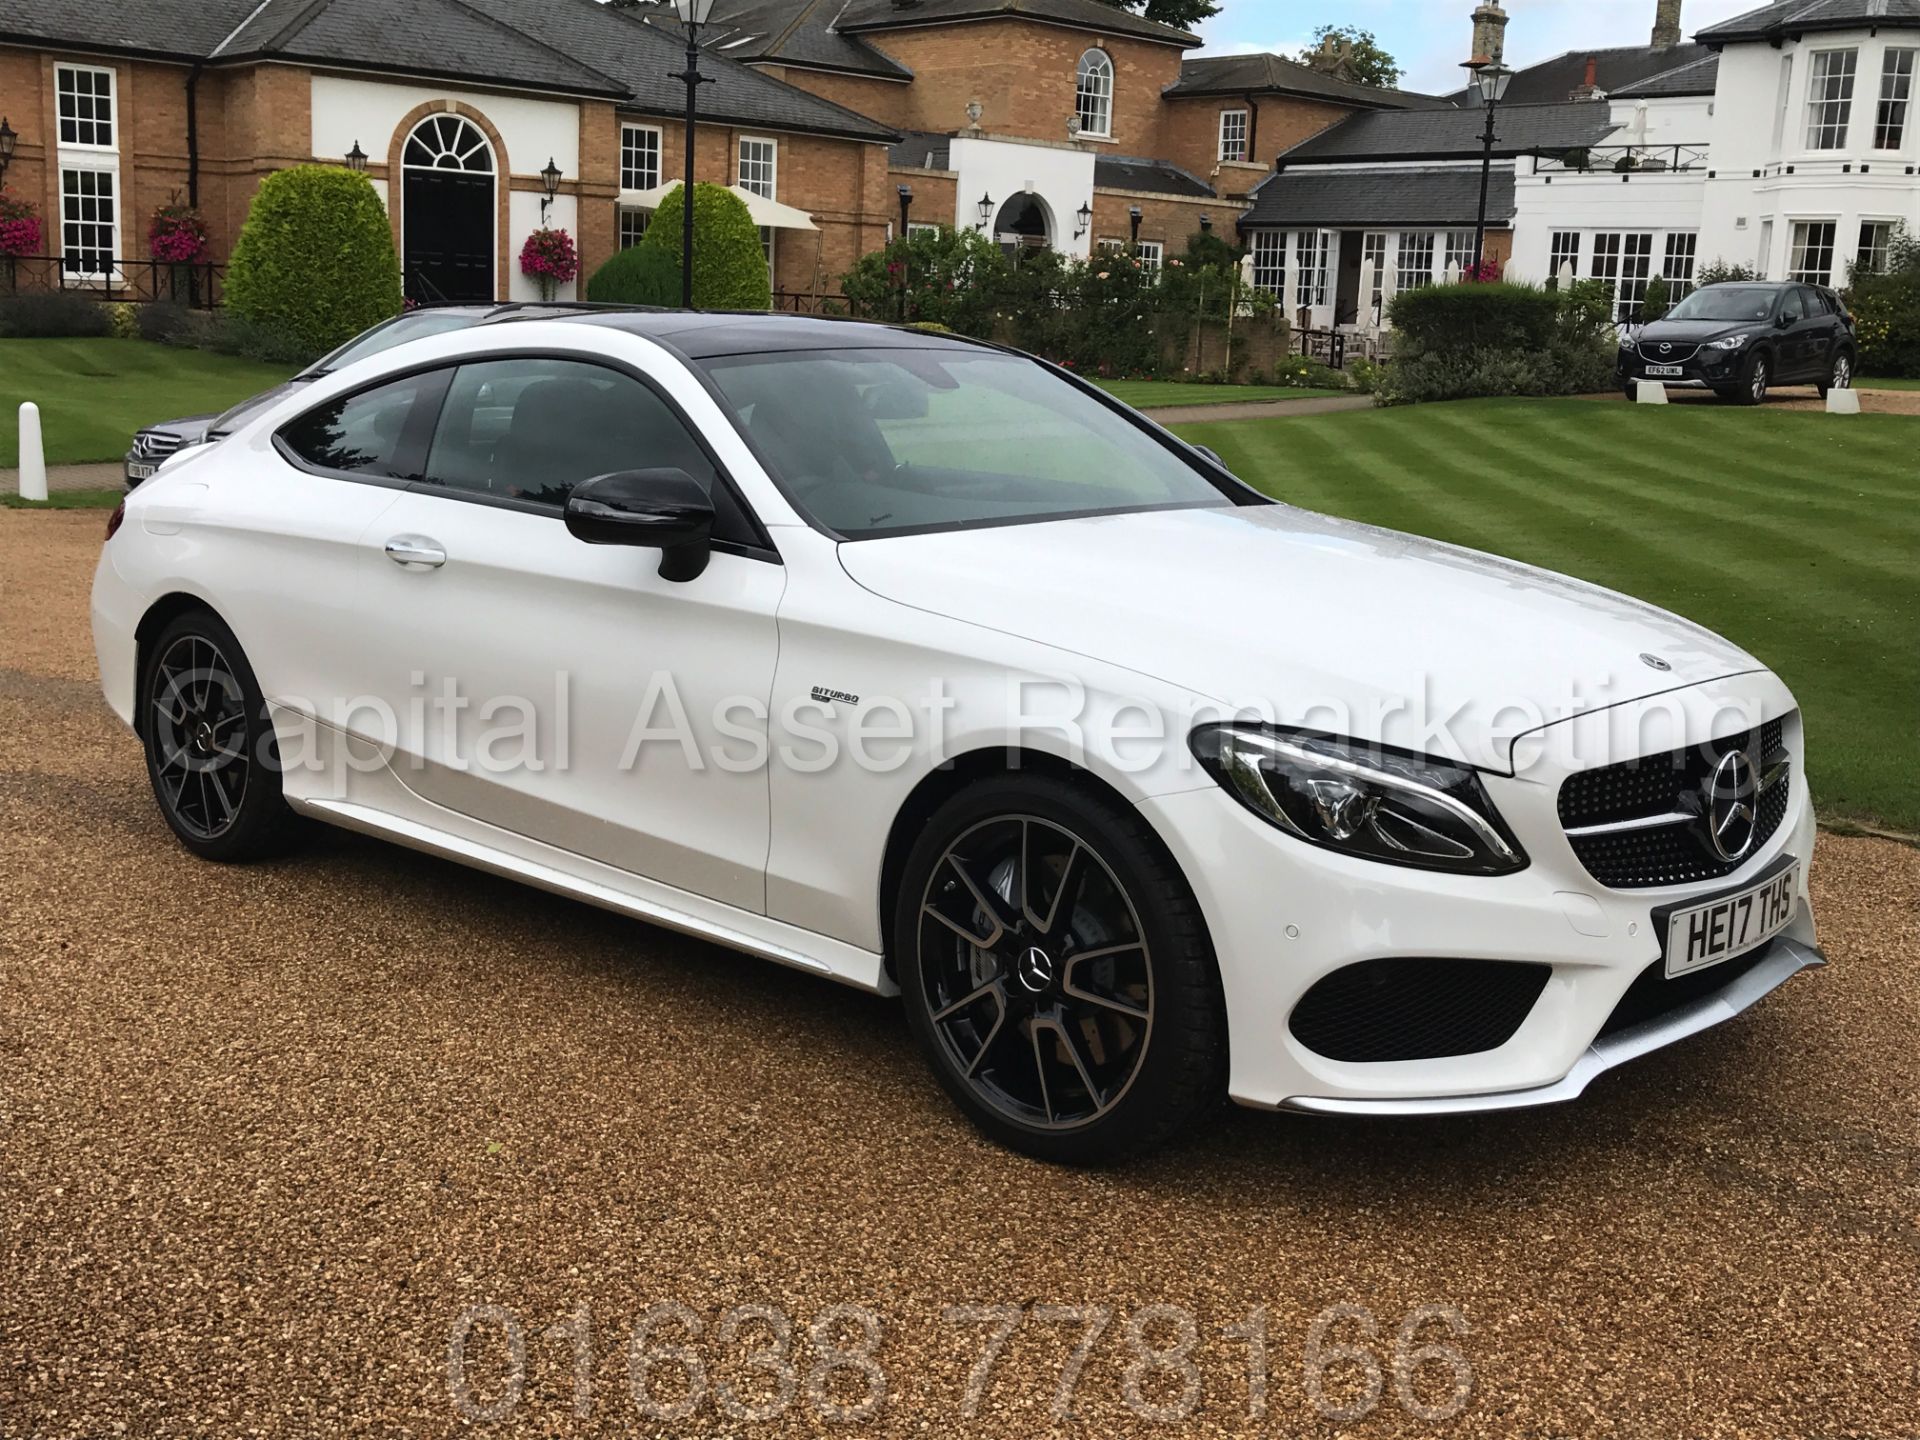 MEREDES-BENZ C43 AMG PREMIUM '4 MATIC' COUPE (2017) '9-G AUTO - LEATHER - SAT NAV' **FULLY LOADED** - Image 3 of 57